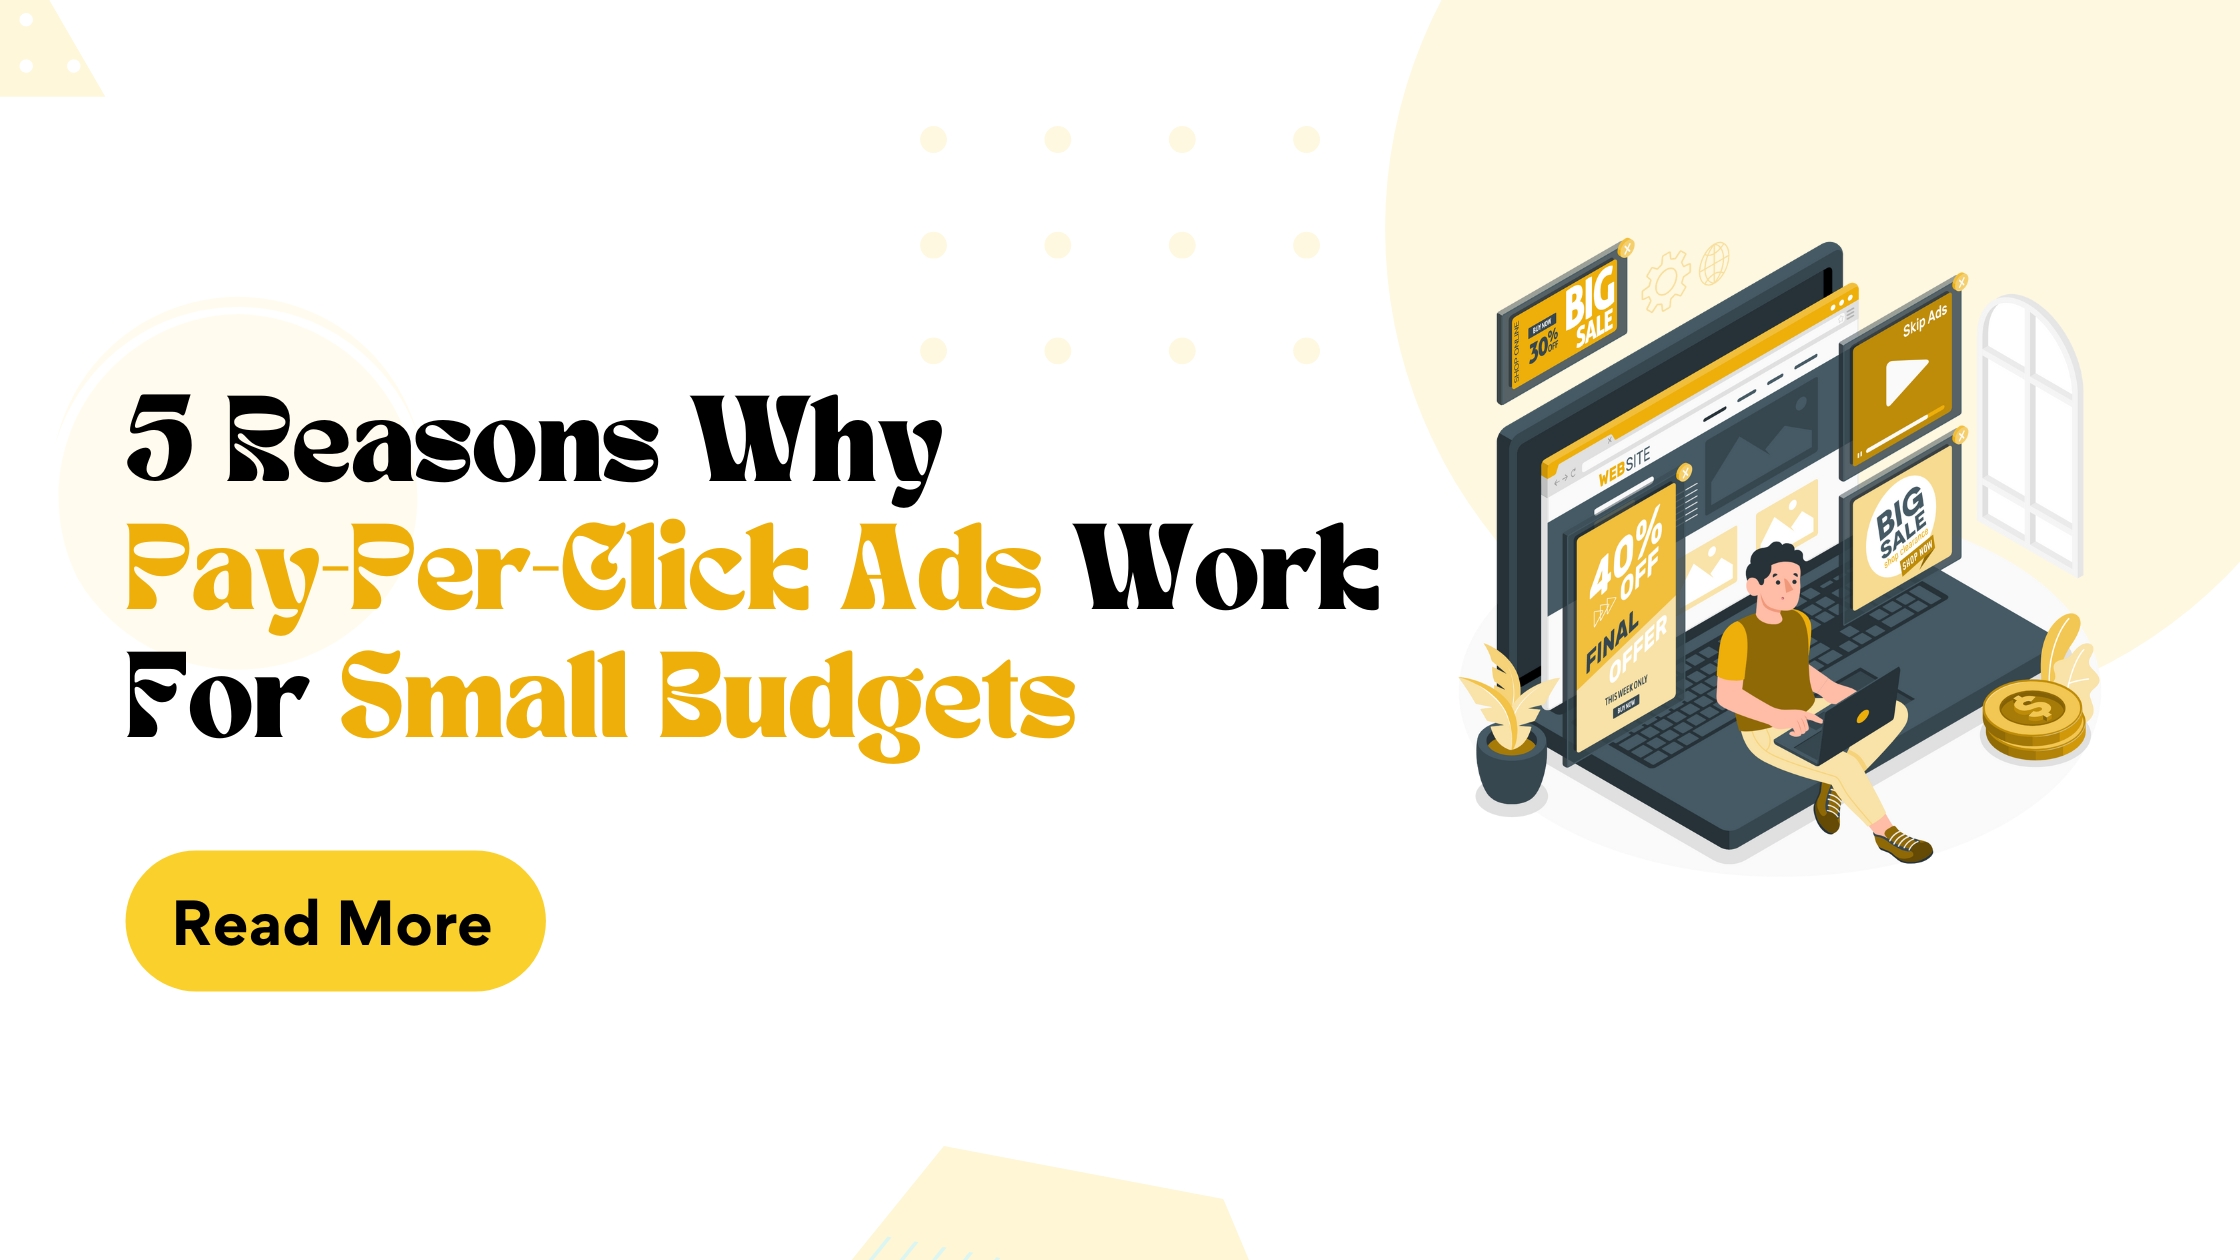 5 Reasons Why Pay-Per-Click Ads Work For Small Budgets